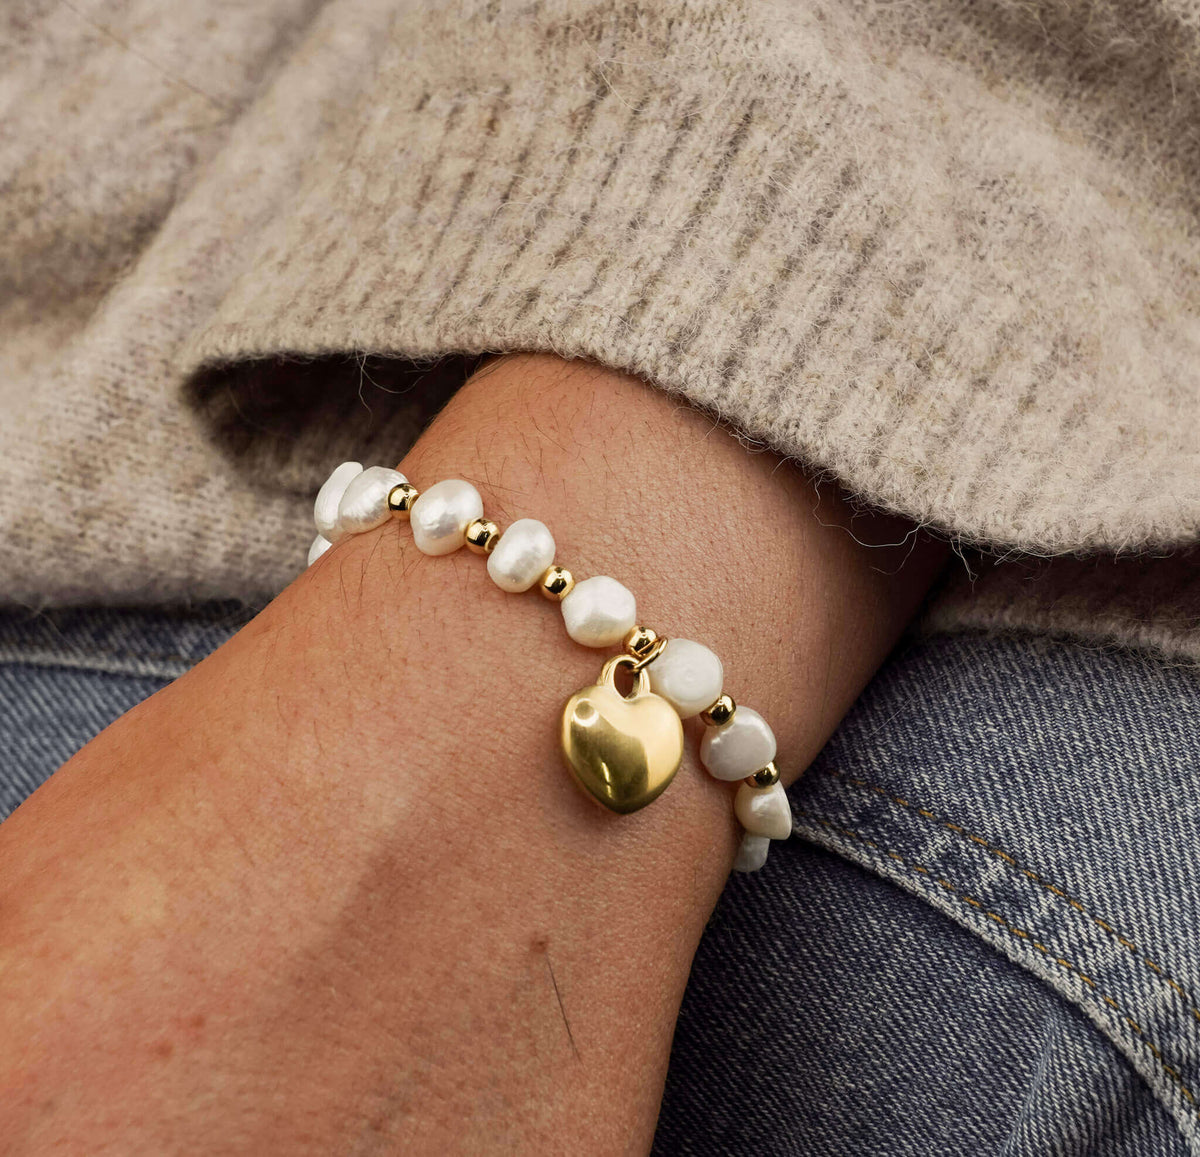 Le Grá Bundle - Dangling Heart Bracelet: A charming bracelet with a gold chain and a heart charm, a symbol of timeless affection